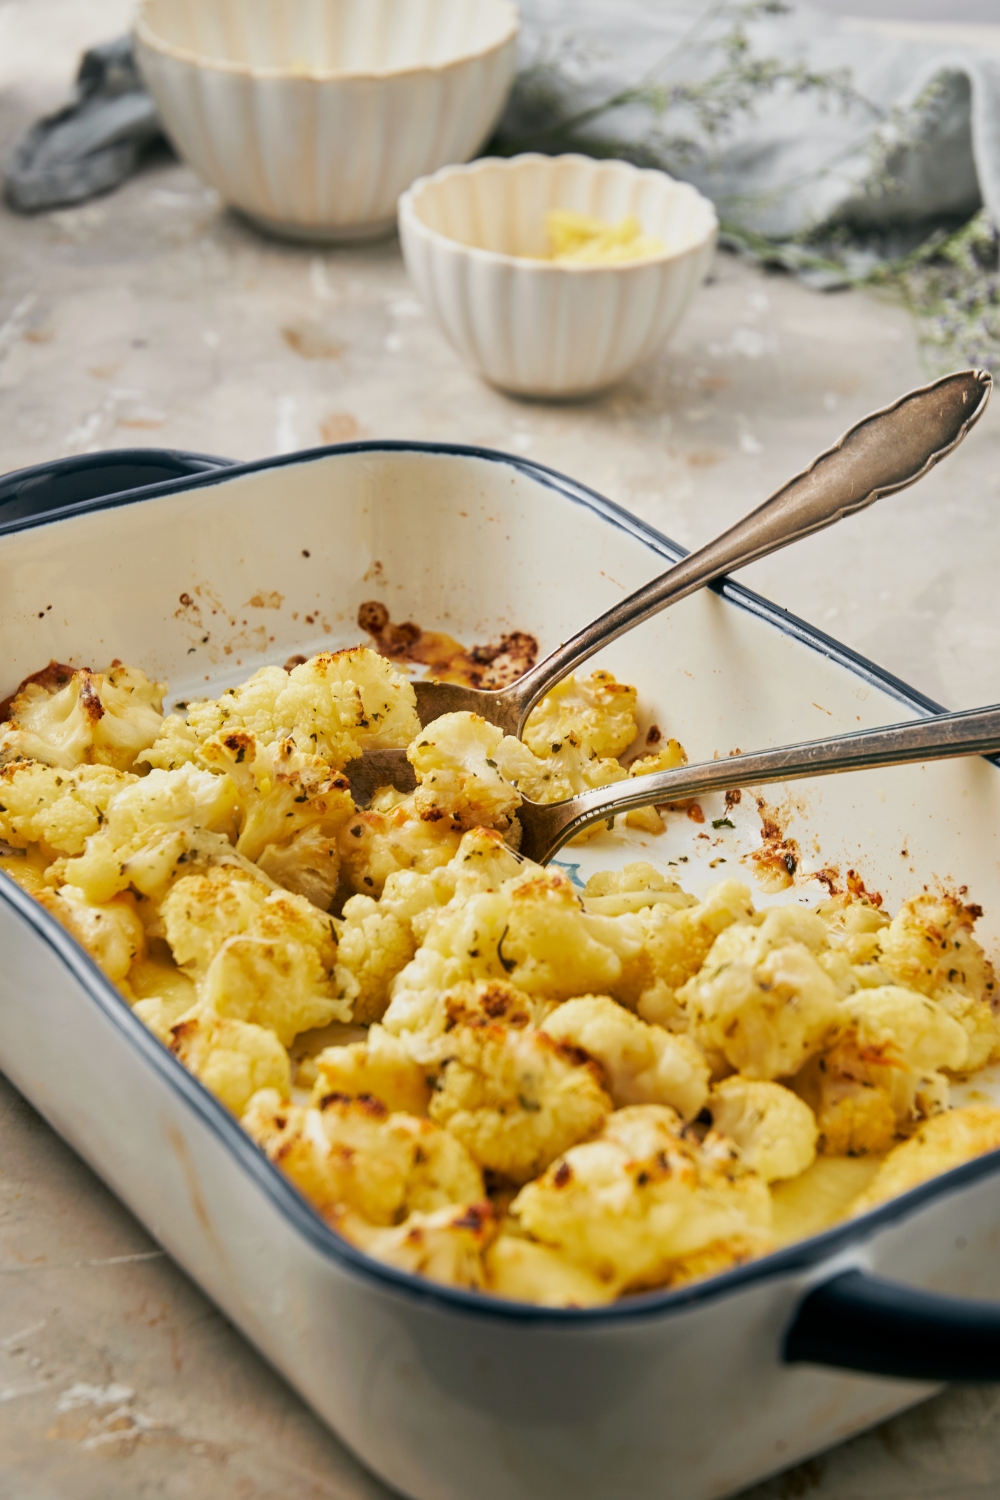 A baking dish with baked cheesy cauliflower and two spoons in it ready to serve.